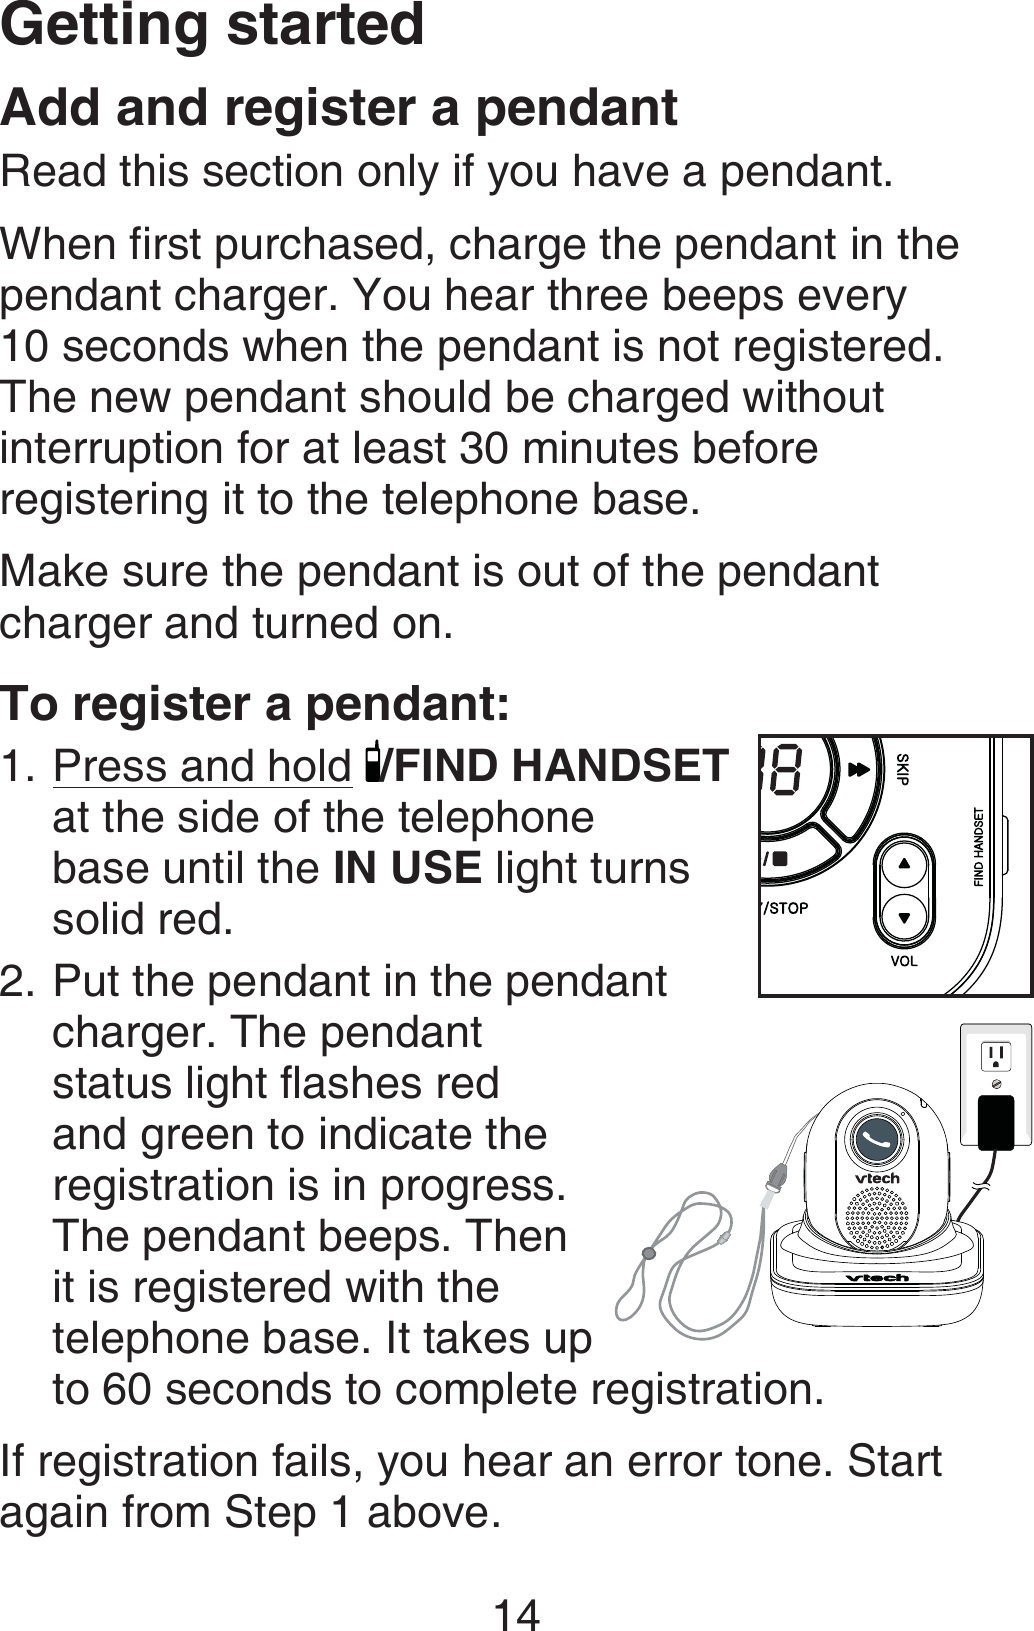 Getting started14Add and register a pendantRead this section only if you have a pendant.When first purchased, charge the pendant in the pendant charger. You hear three beeps every  10 seconds when the pendant is not registered.  The new pendant should be charged without interruption for at least 30 minutes before registering it to the telephone base.Make sure the pendant is out of the pendant charger and turned on. To register a pendant:Press and hold /FIND HANDSET at the side of the telephone  base until the IN USE light turns solid red.Put the pendant in the pendant charger. The pendant status light flashes red and green to indicate the registration is in progress. The pendant beeps. Then it is registered with the telephone base. It takes up to 60 seconds to complete registration.If registration fails, you hear an error tone. Start again from Step 1 above.1.2.